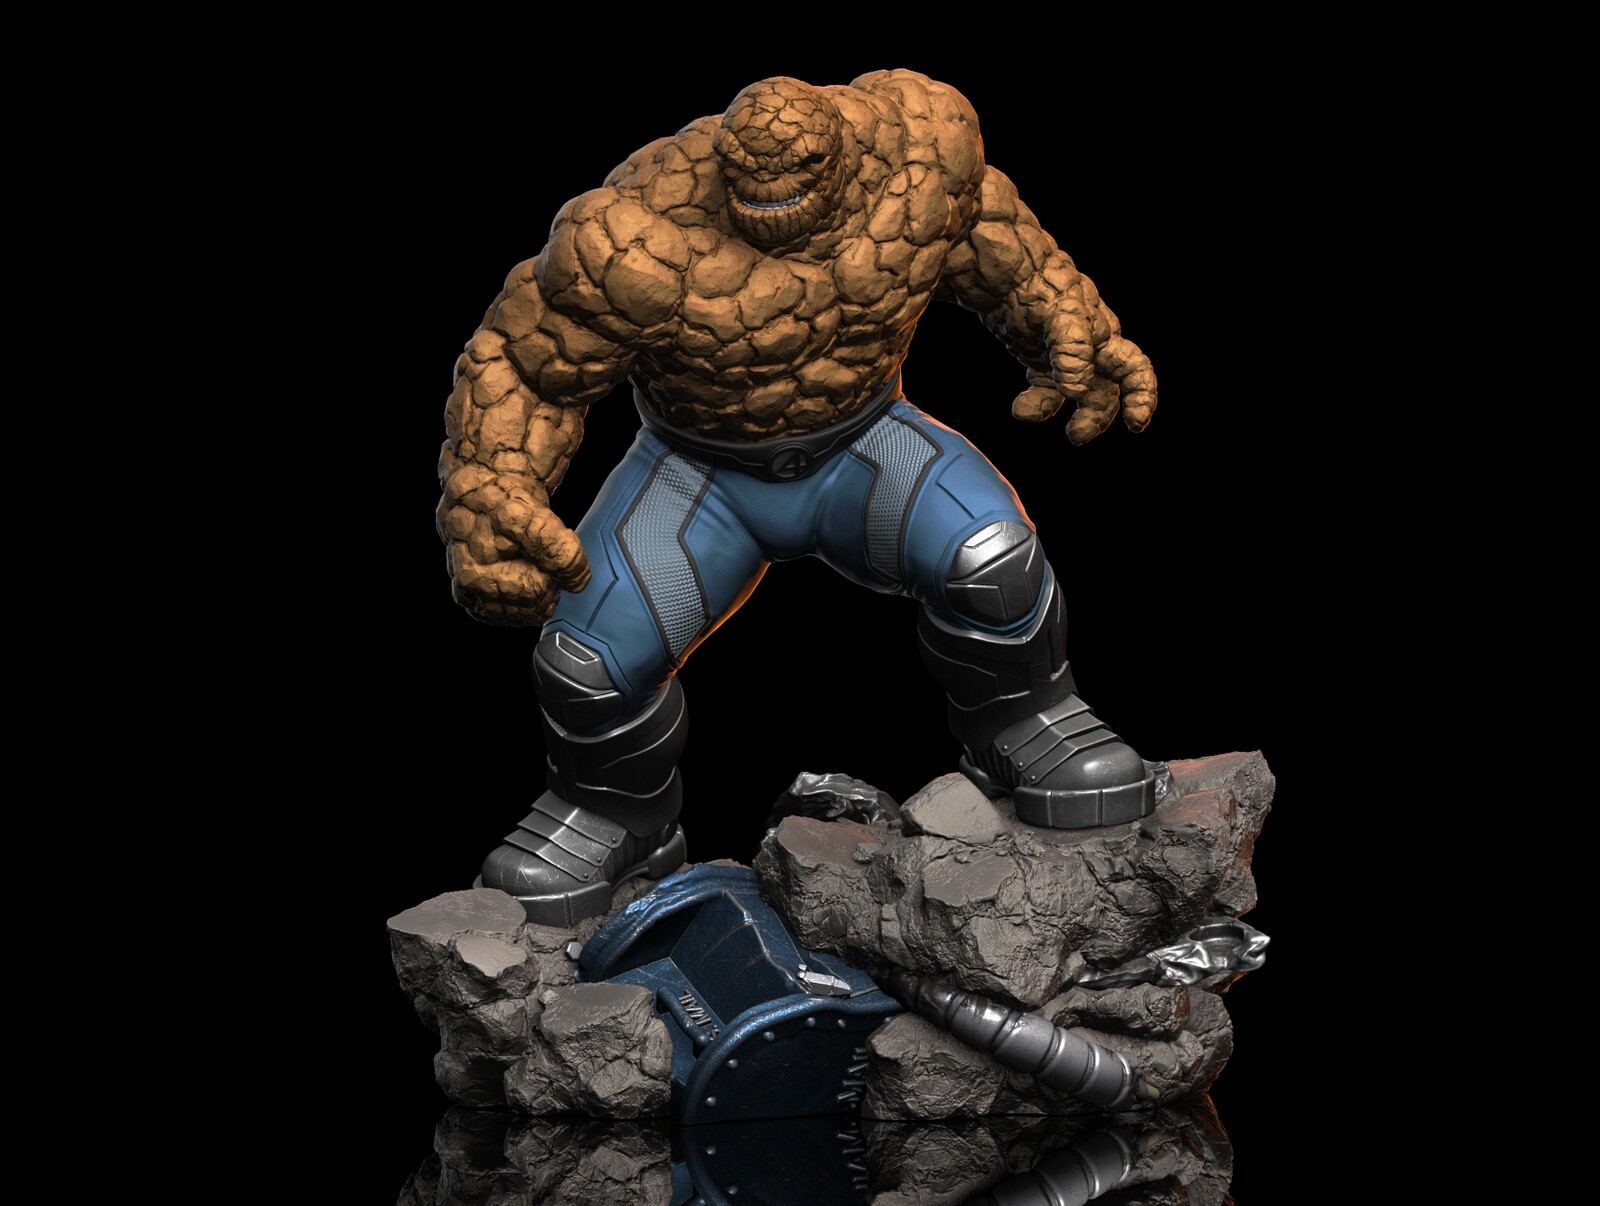 Ben Grimm "The Thing" .